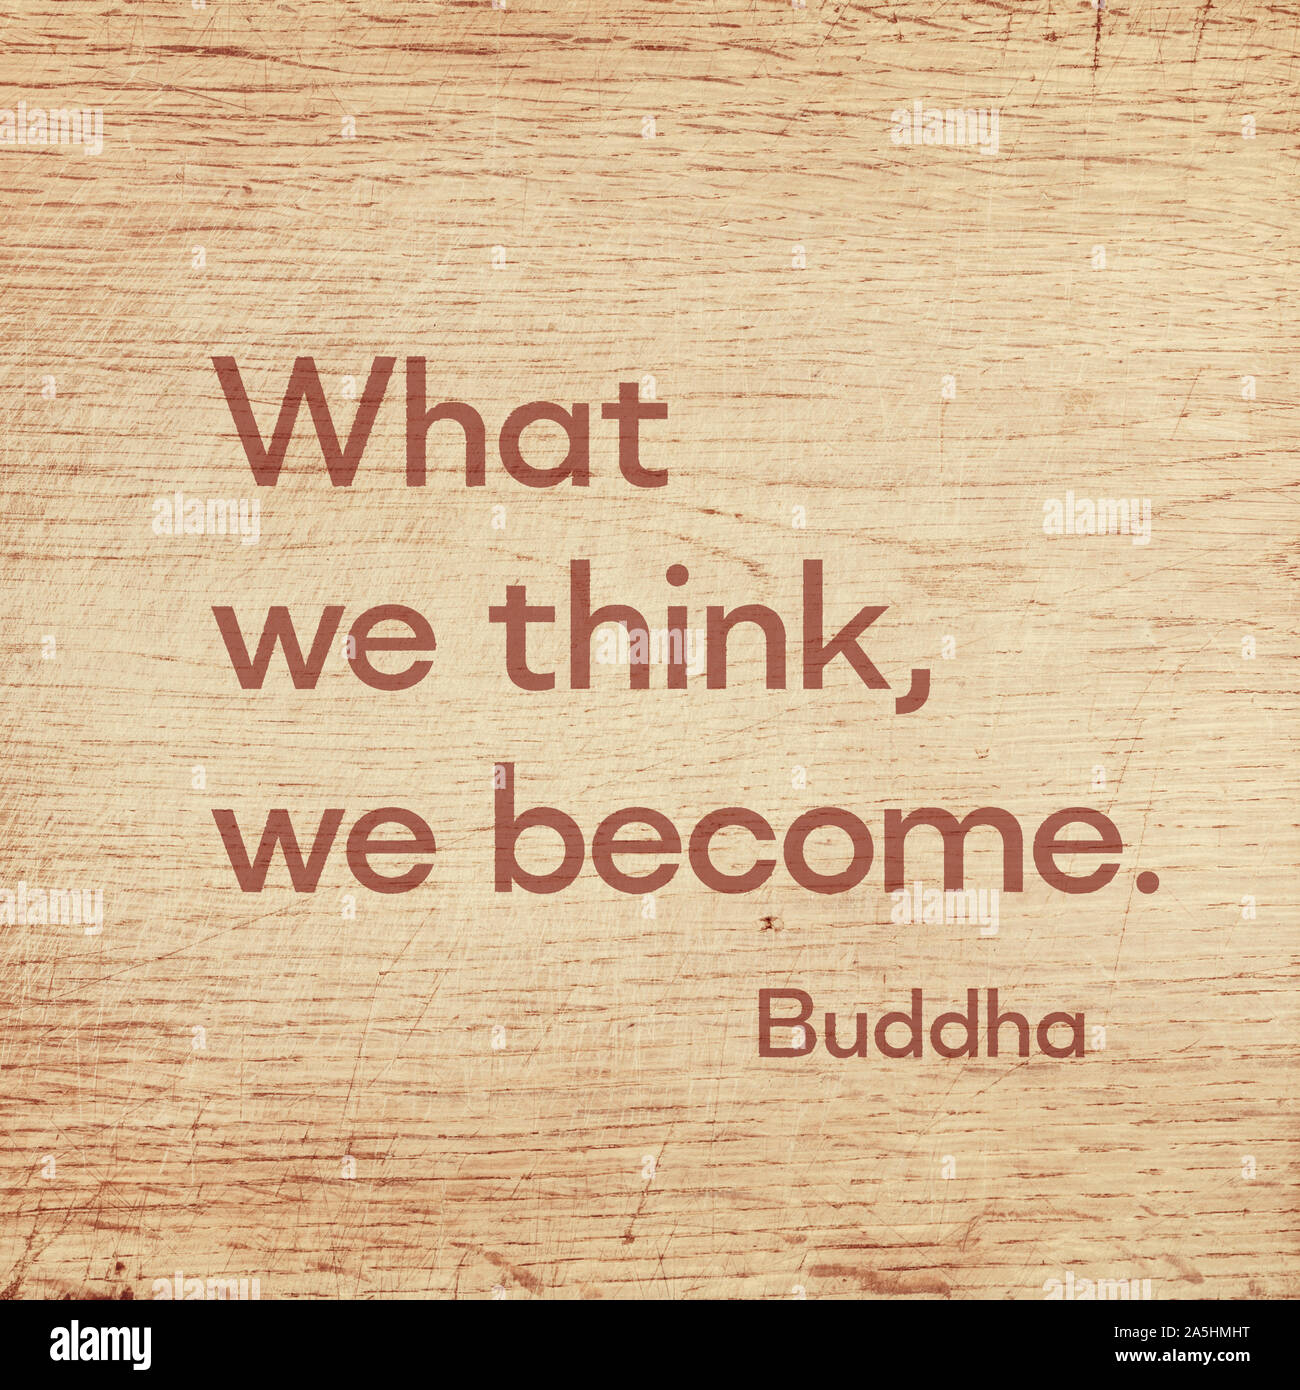 What we think, we become - famous quote of Gautama Buddha printed on grunge wooden board Stock Photo